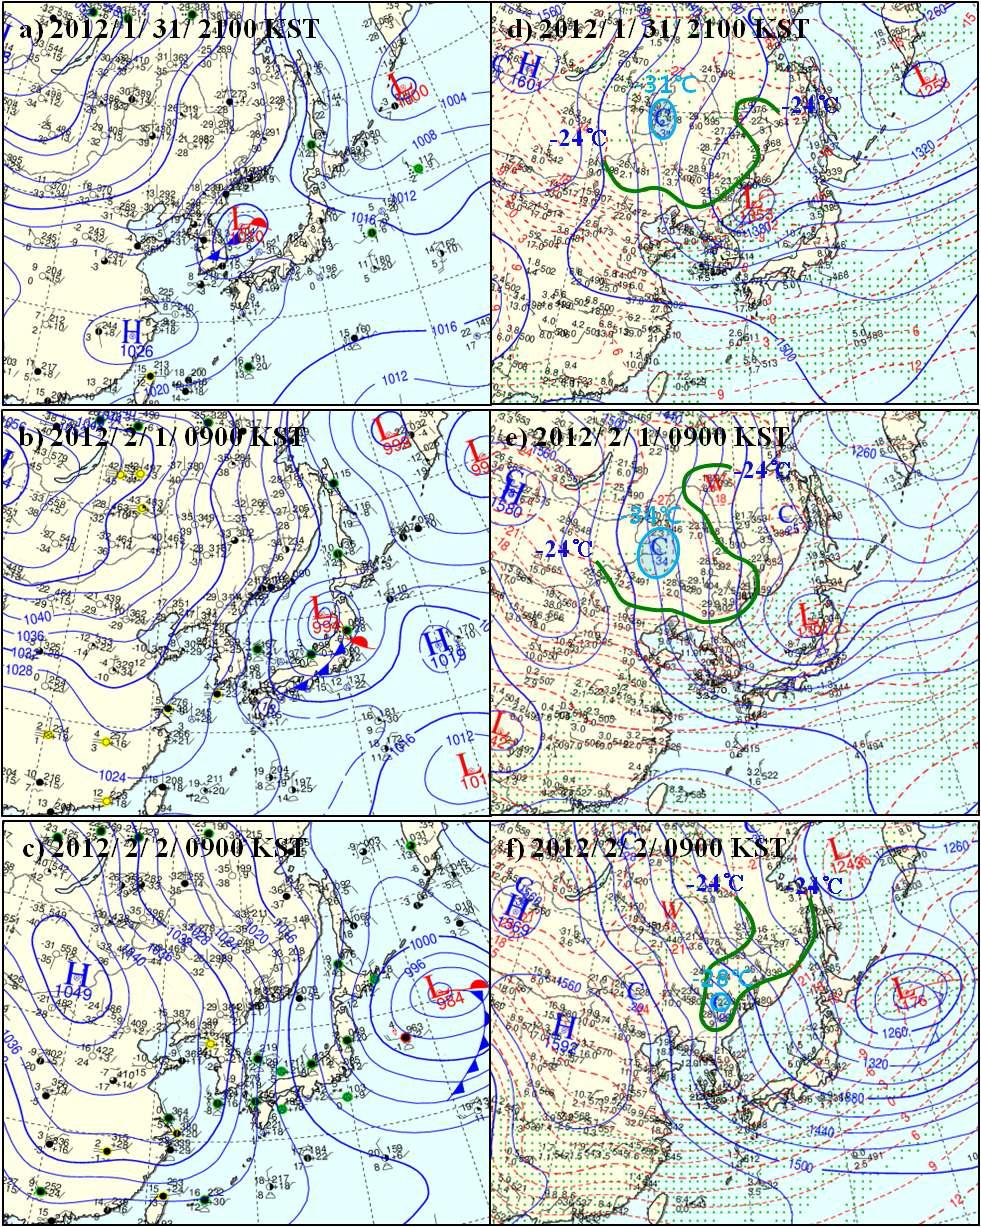 Weather charts of Surface and 850 hPa (a, d) at 2100 KST 31 January, (b, e) at 0900 KST 1, and (c, f) at 0900 KST 2 February 2012, respectively. The green solid line is isotherm of 24℃. The light blue circle indicates the area of cold core.